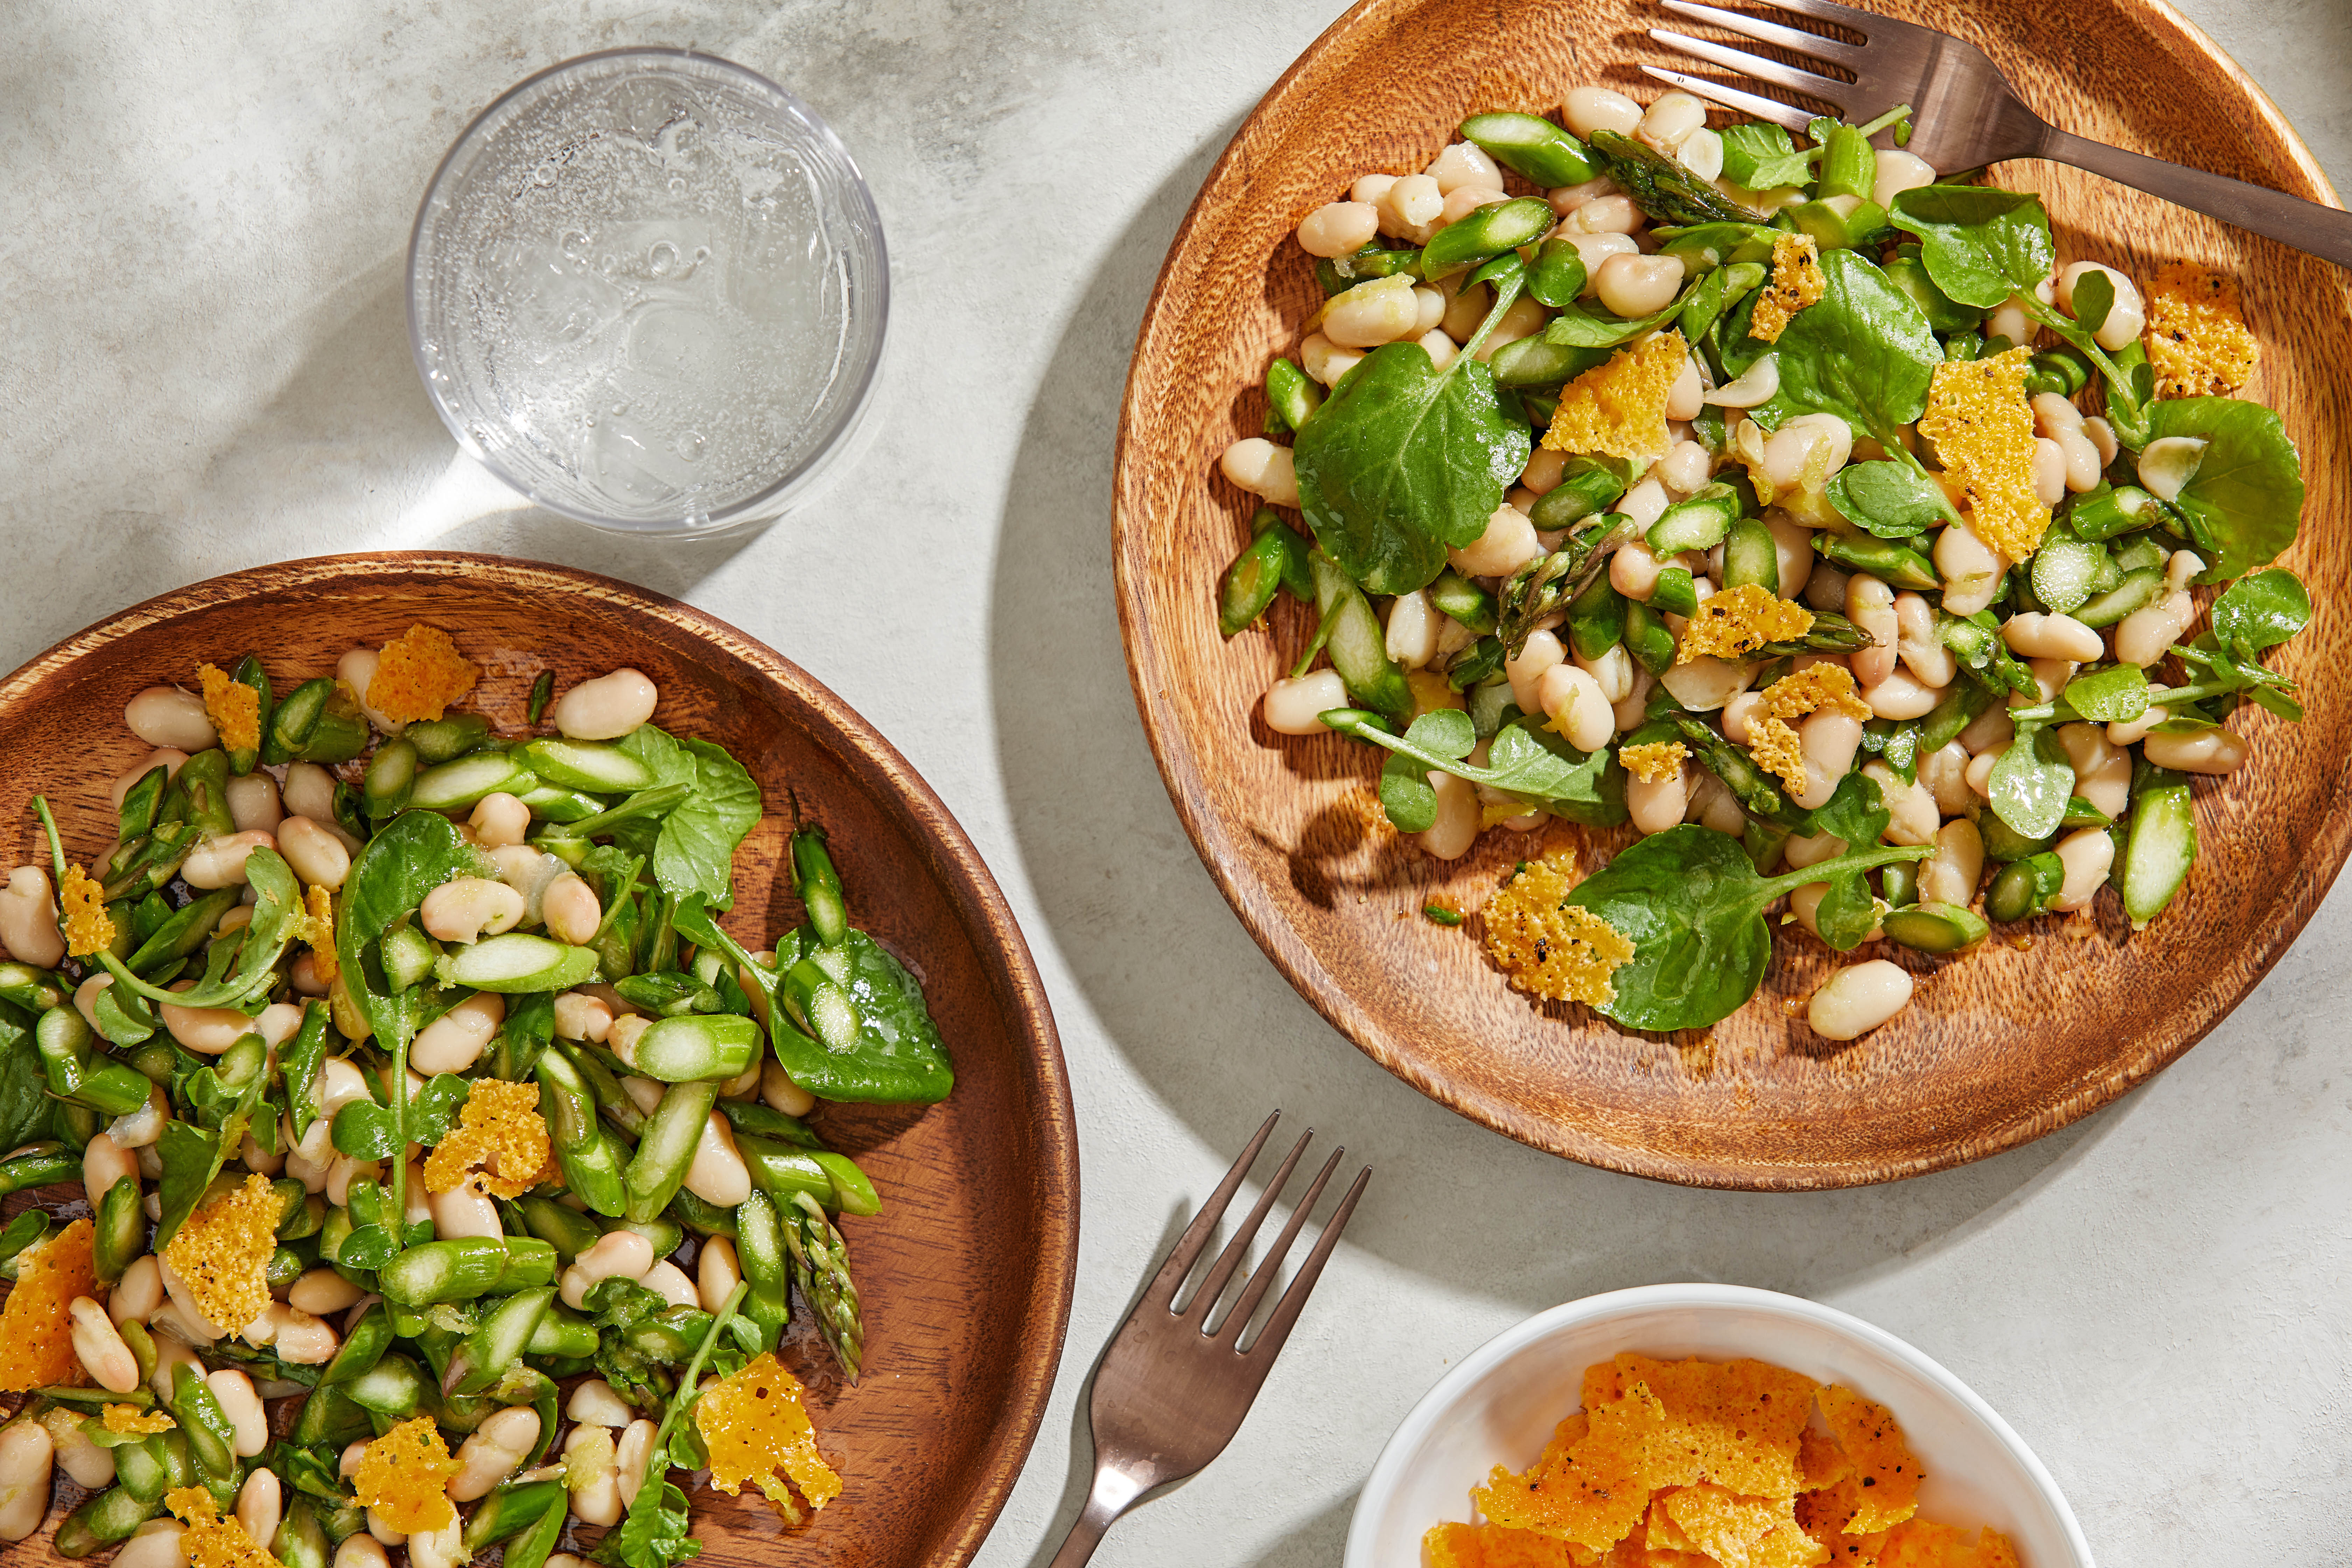 Top this summery salad off with a flavourful and crispy cheddar frico